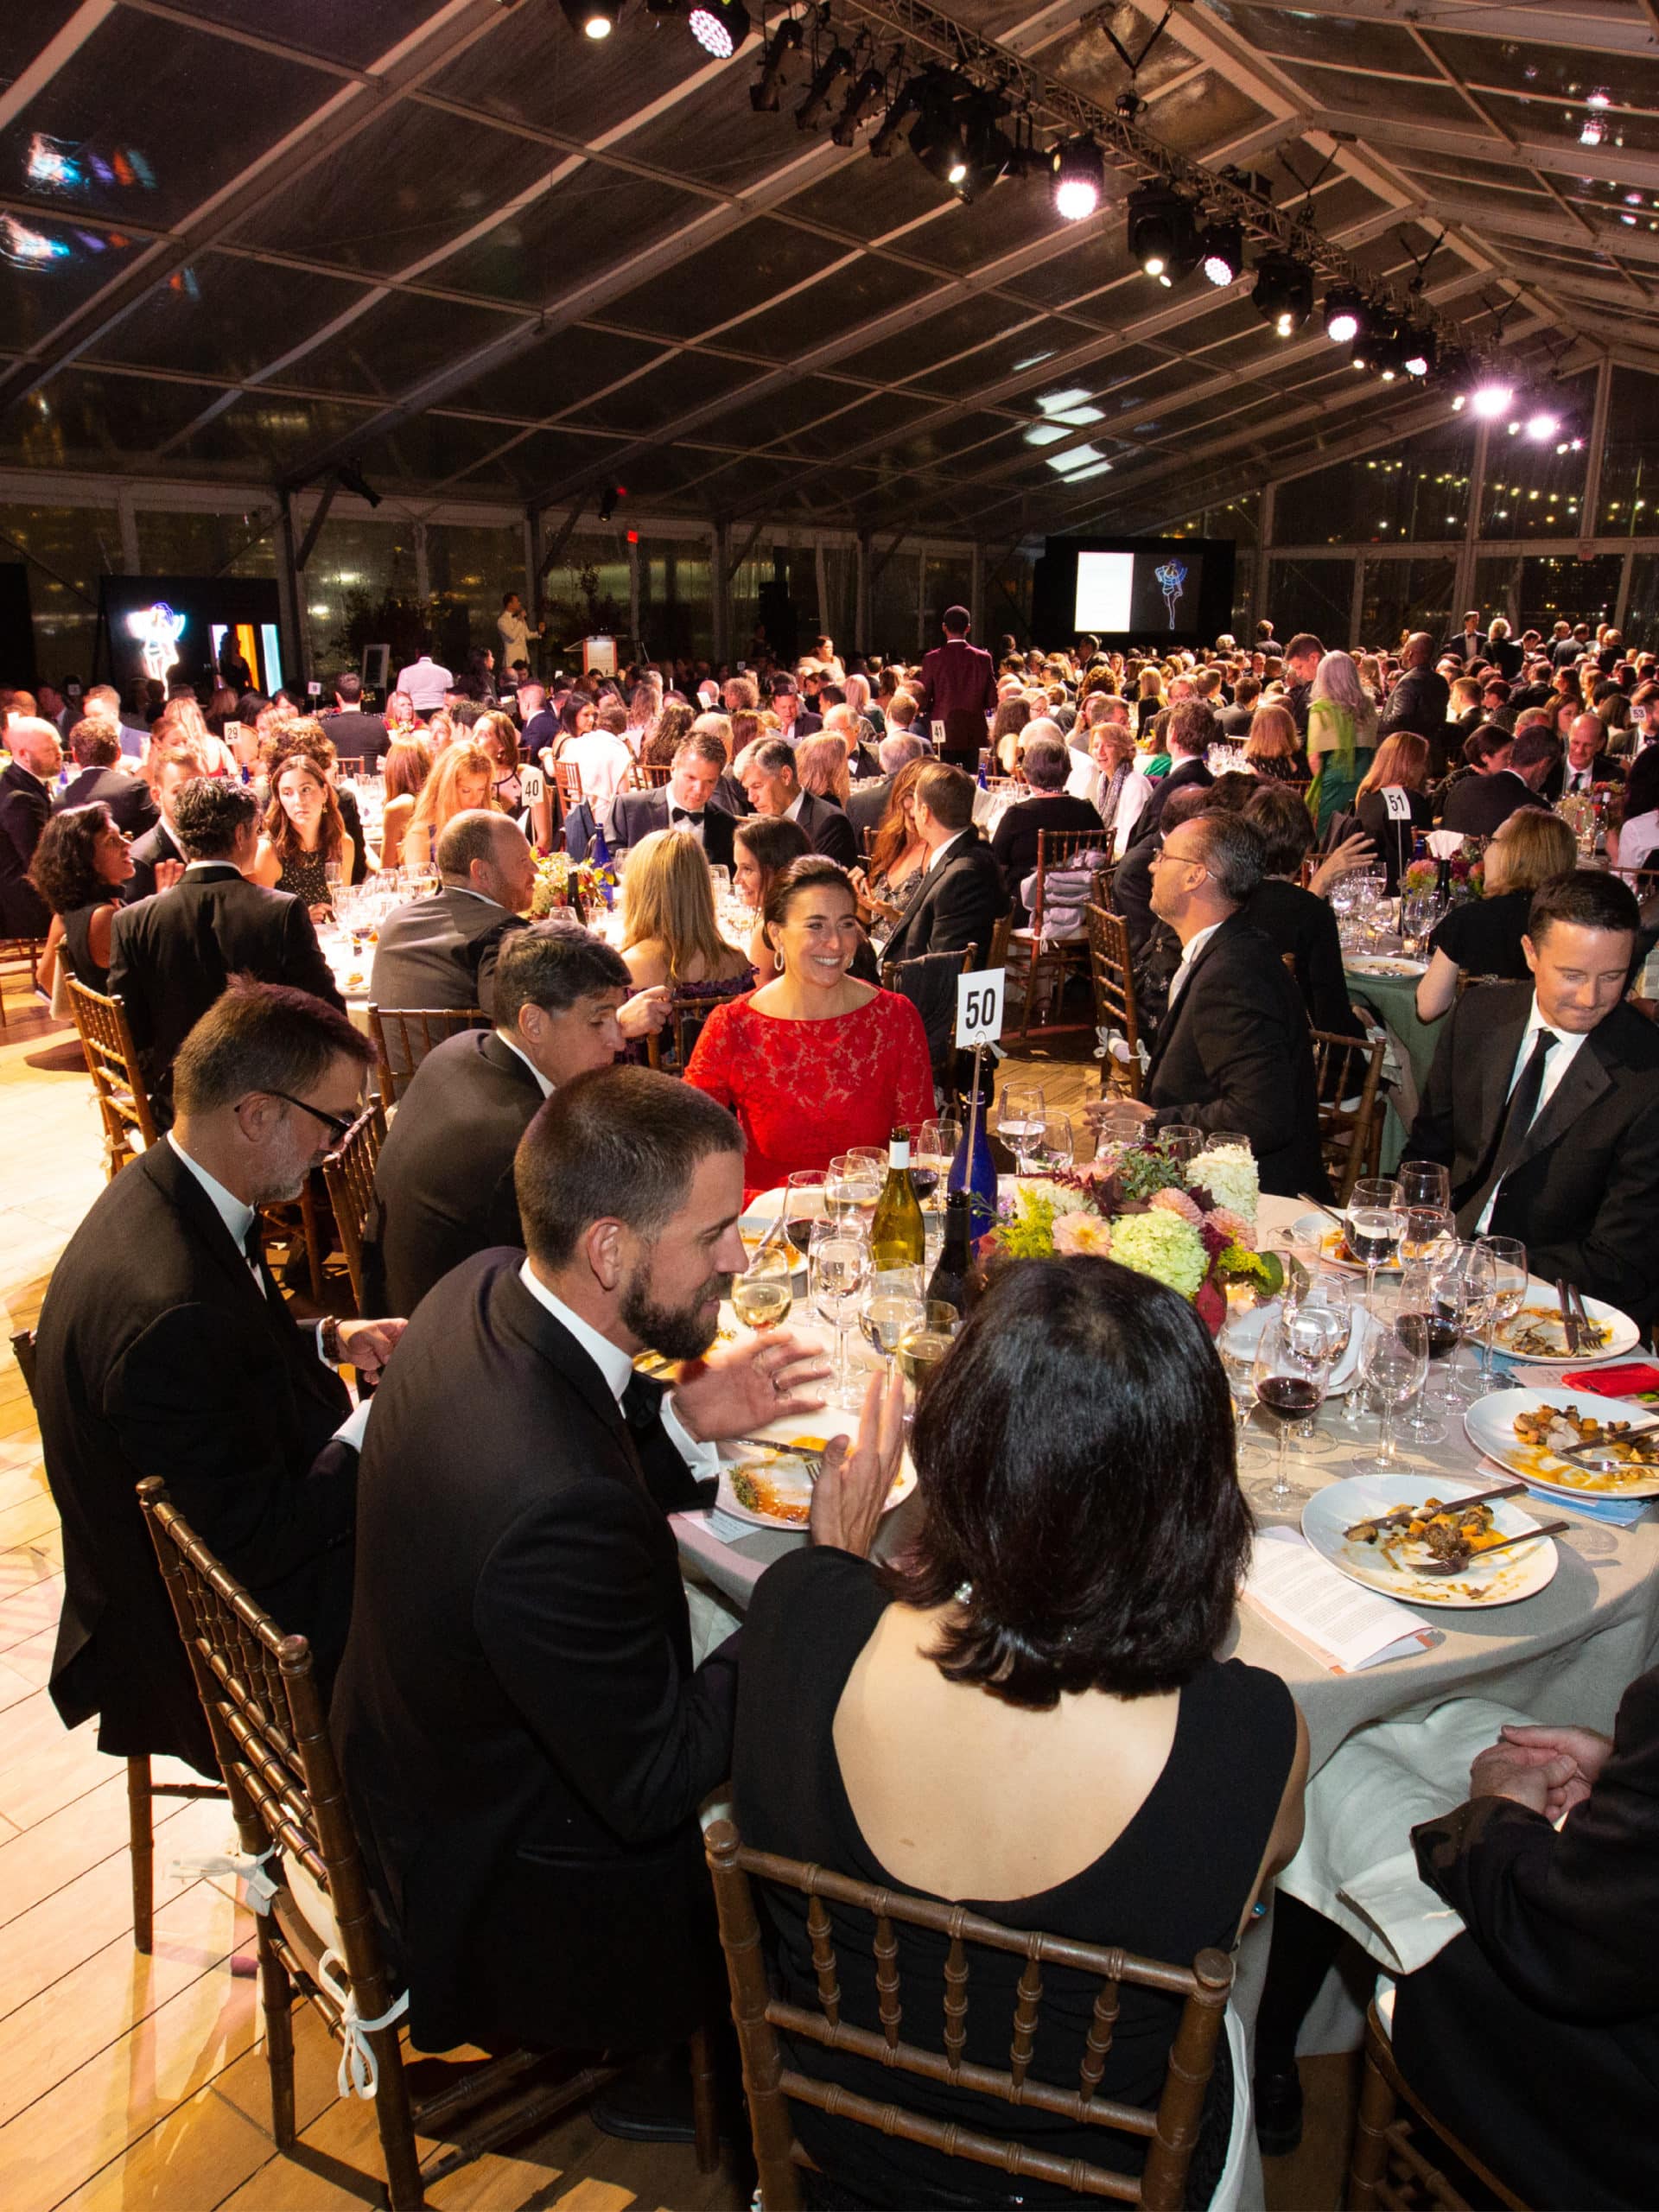 Guests sitting around tables eating at the Brooklyn Black Tie Ball